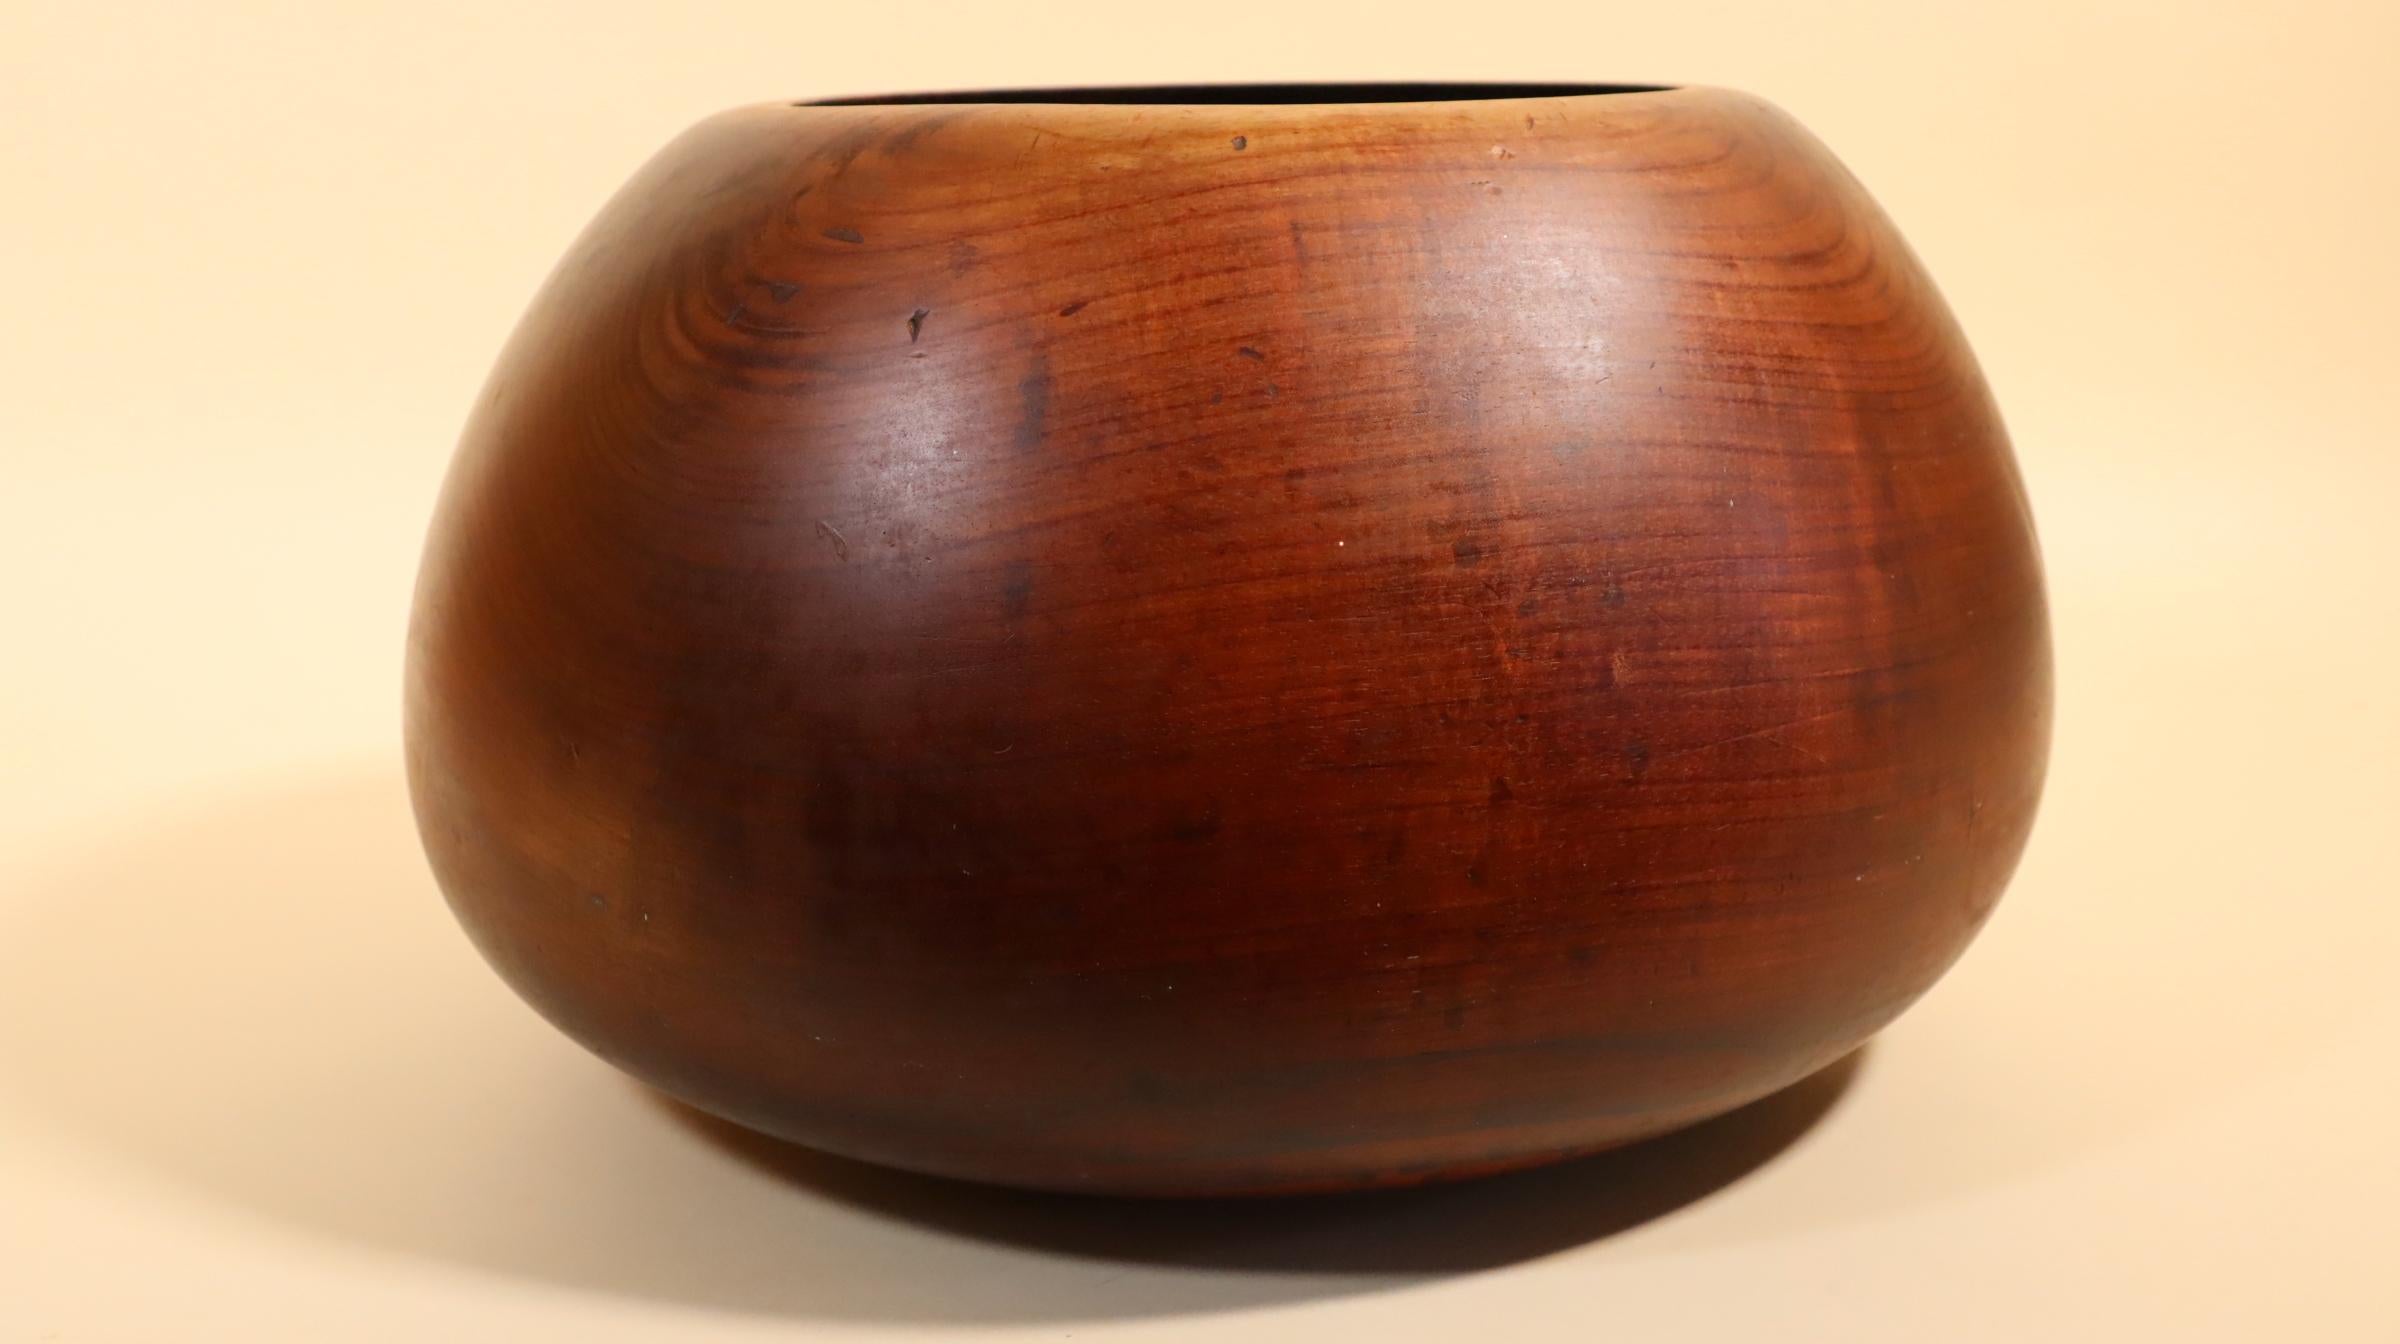 Very large teak wood salad or serving bowl. Origin not known. One piece of wood, not laminated.  Probably Northern European, Scandinavian, Finland?
Measures 9 inches high and outside dimensions are 15 x 16 inches.
It shows wear and patina from